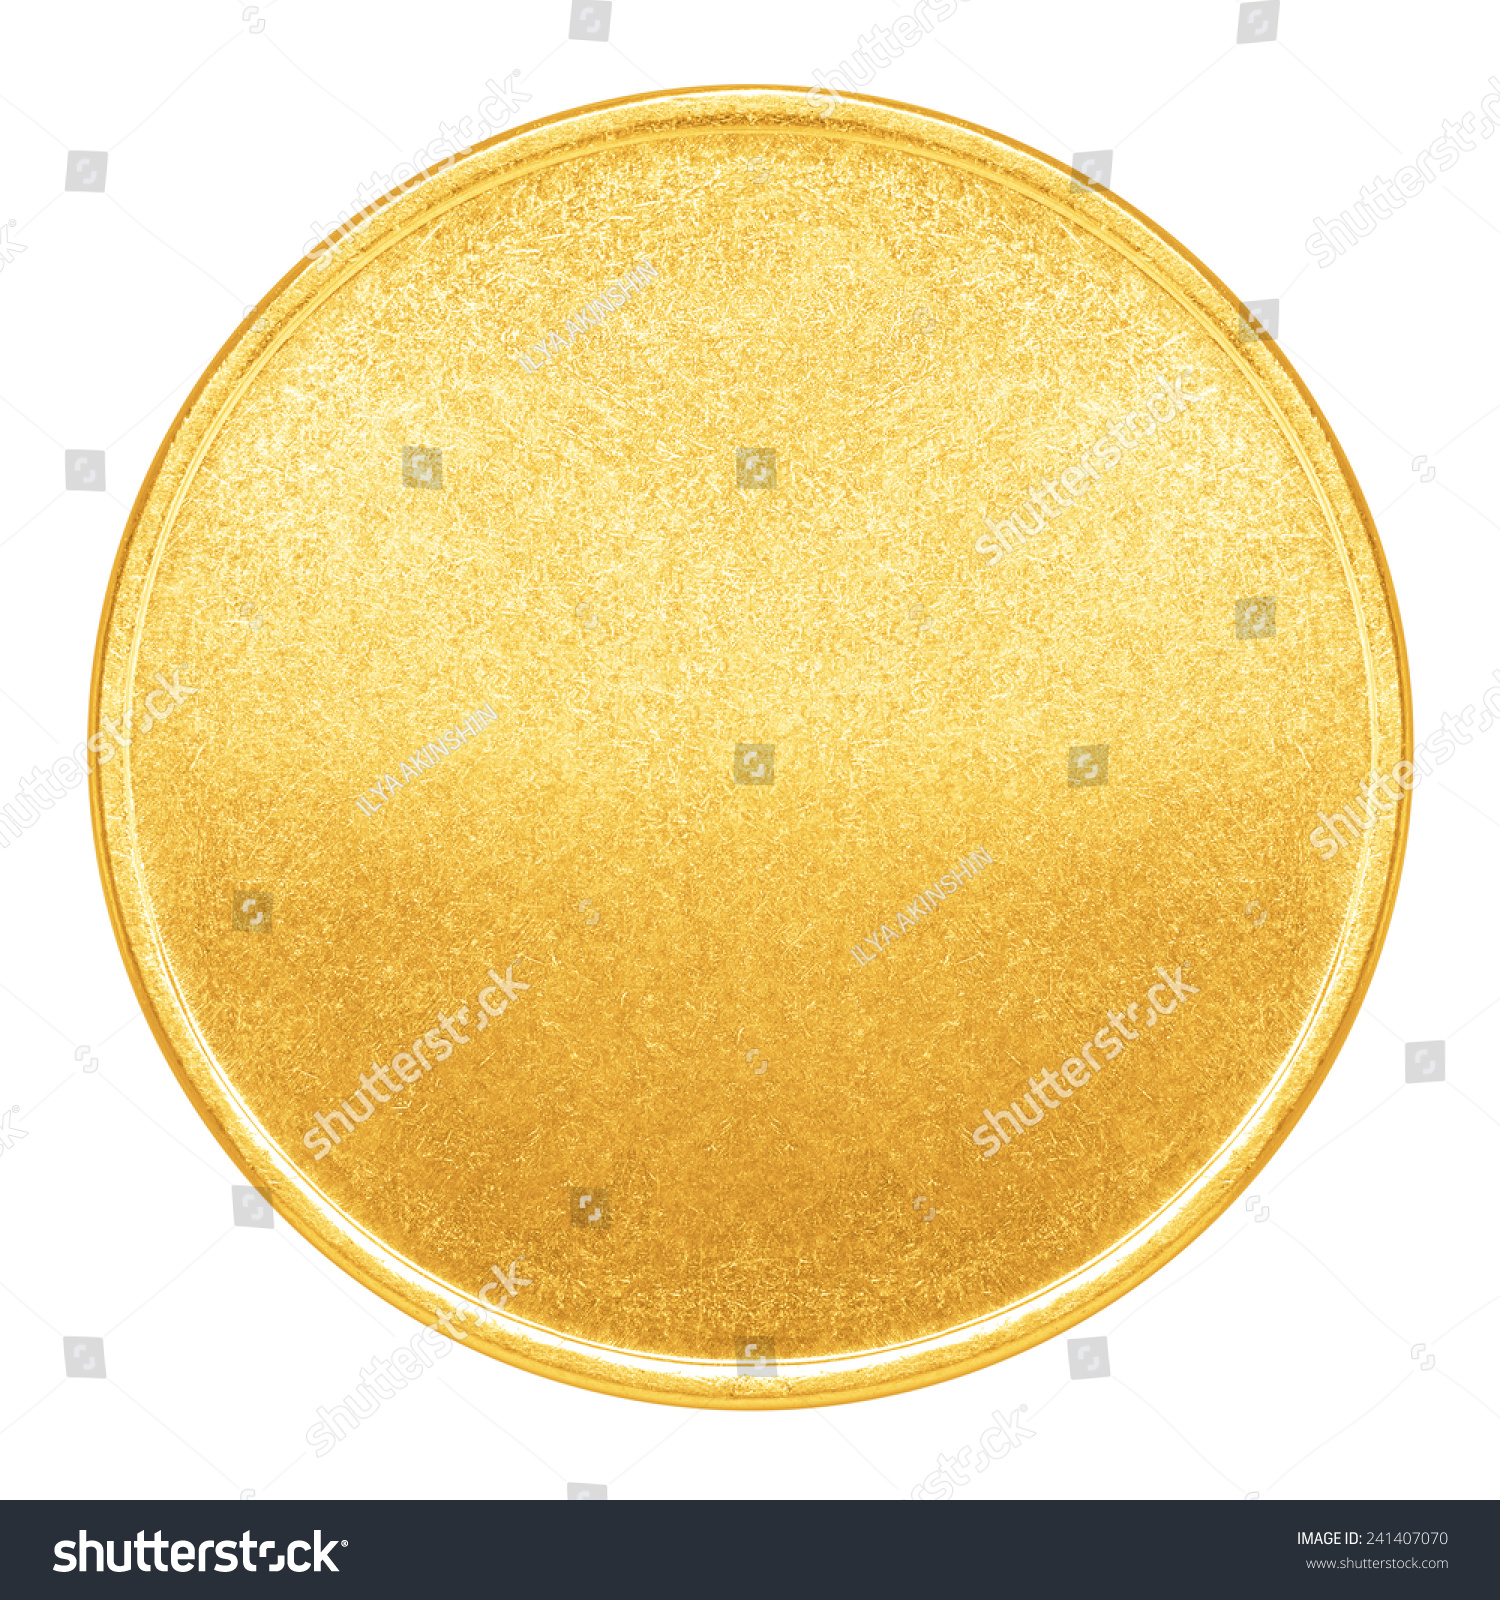 Blank template for gold coin or medal with metal texture #241407070